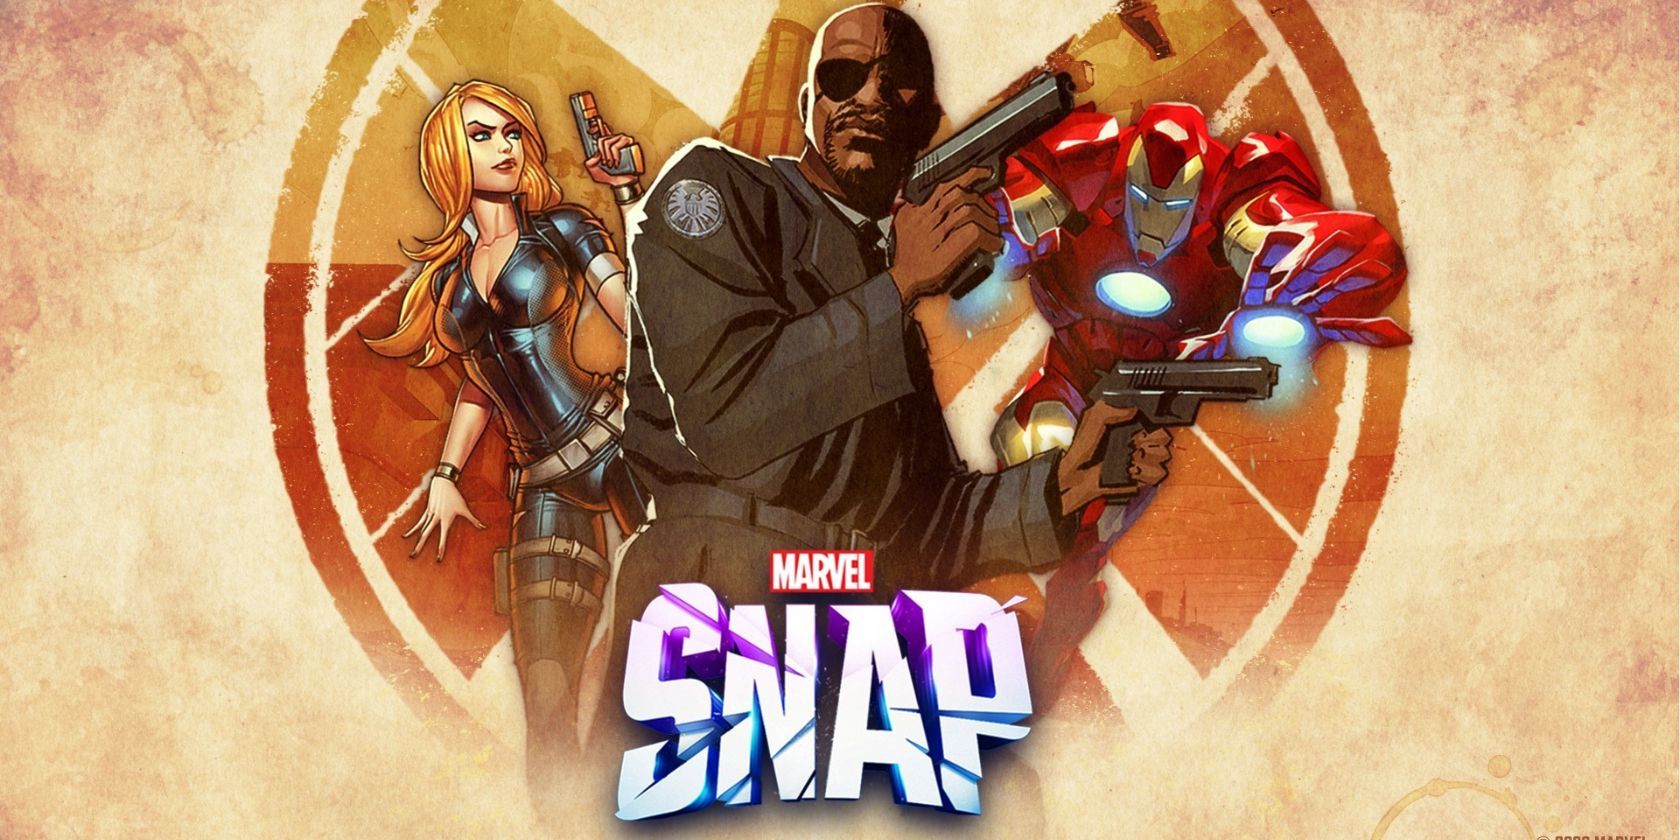 Marvel Snap review: A brilliant, fun, and strategic card game